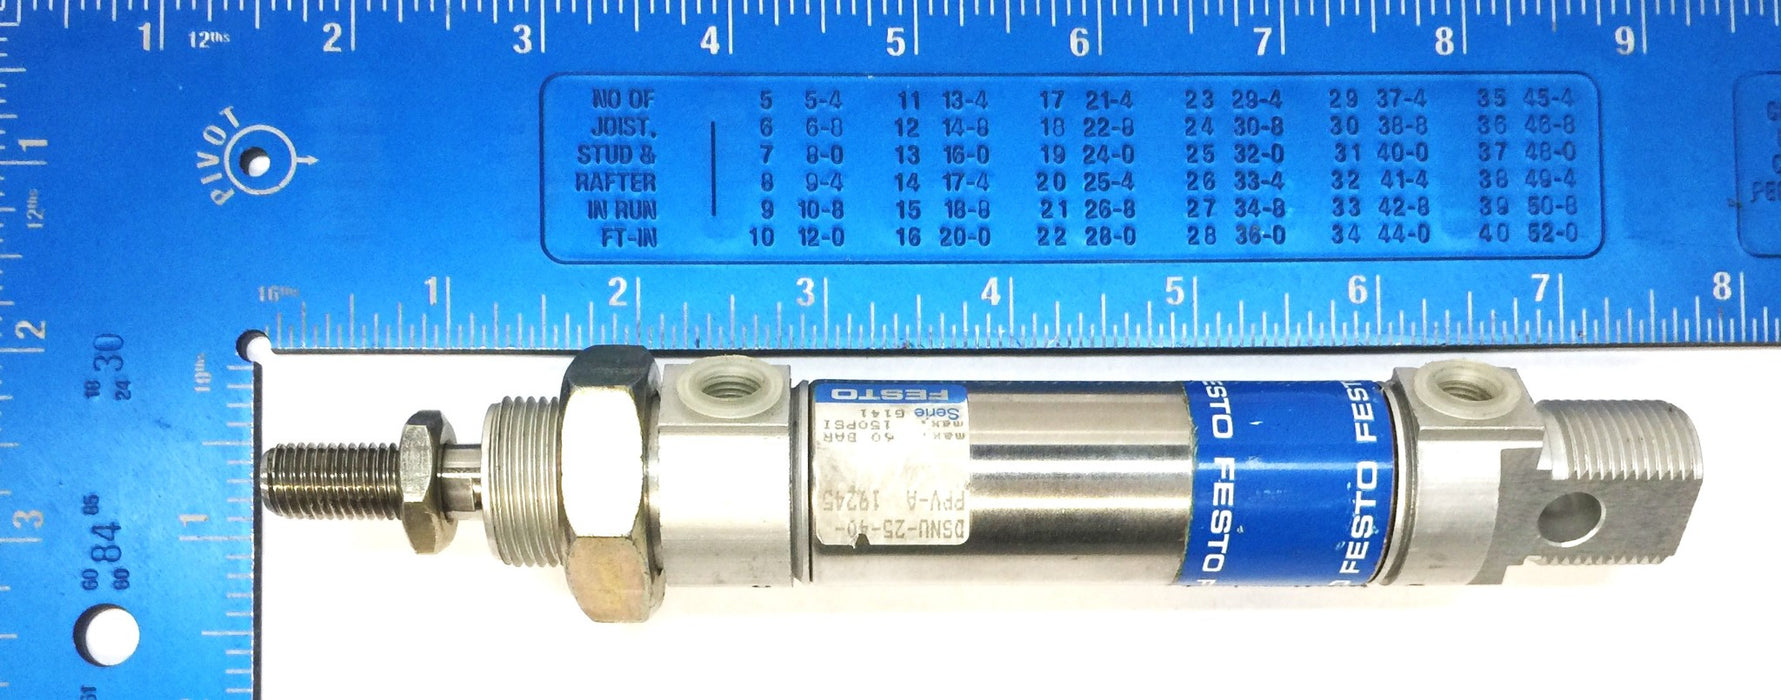 Festo Stainless Pneumatic Air Cylinder DSNU-25-40-PPV-A NOS